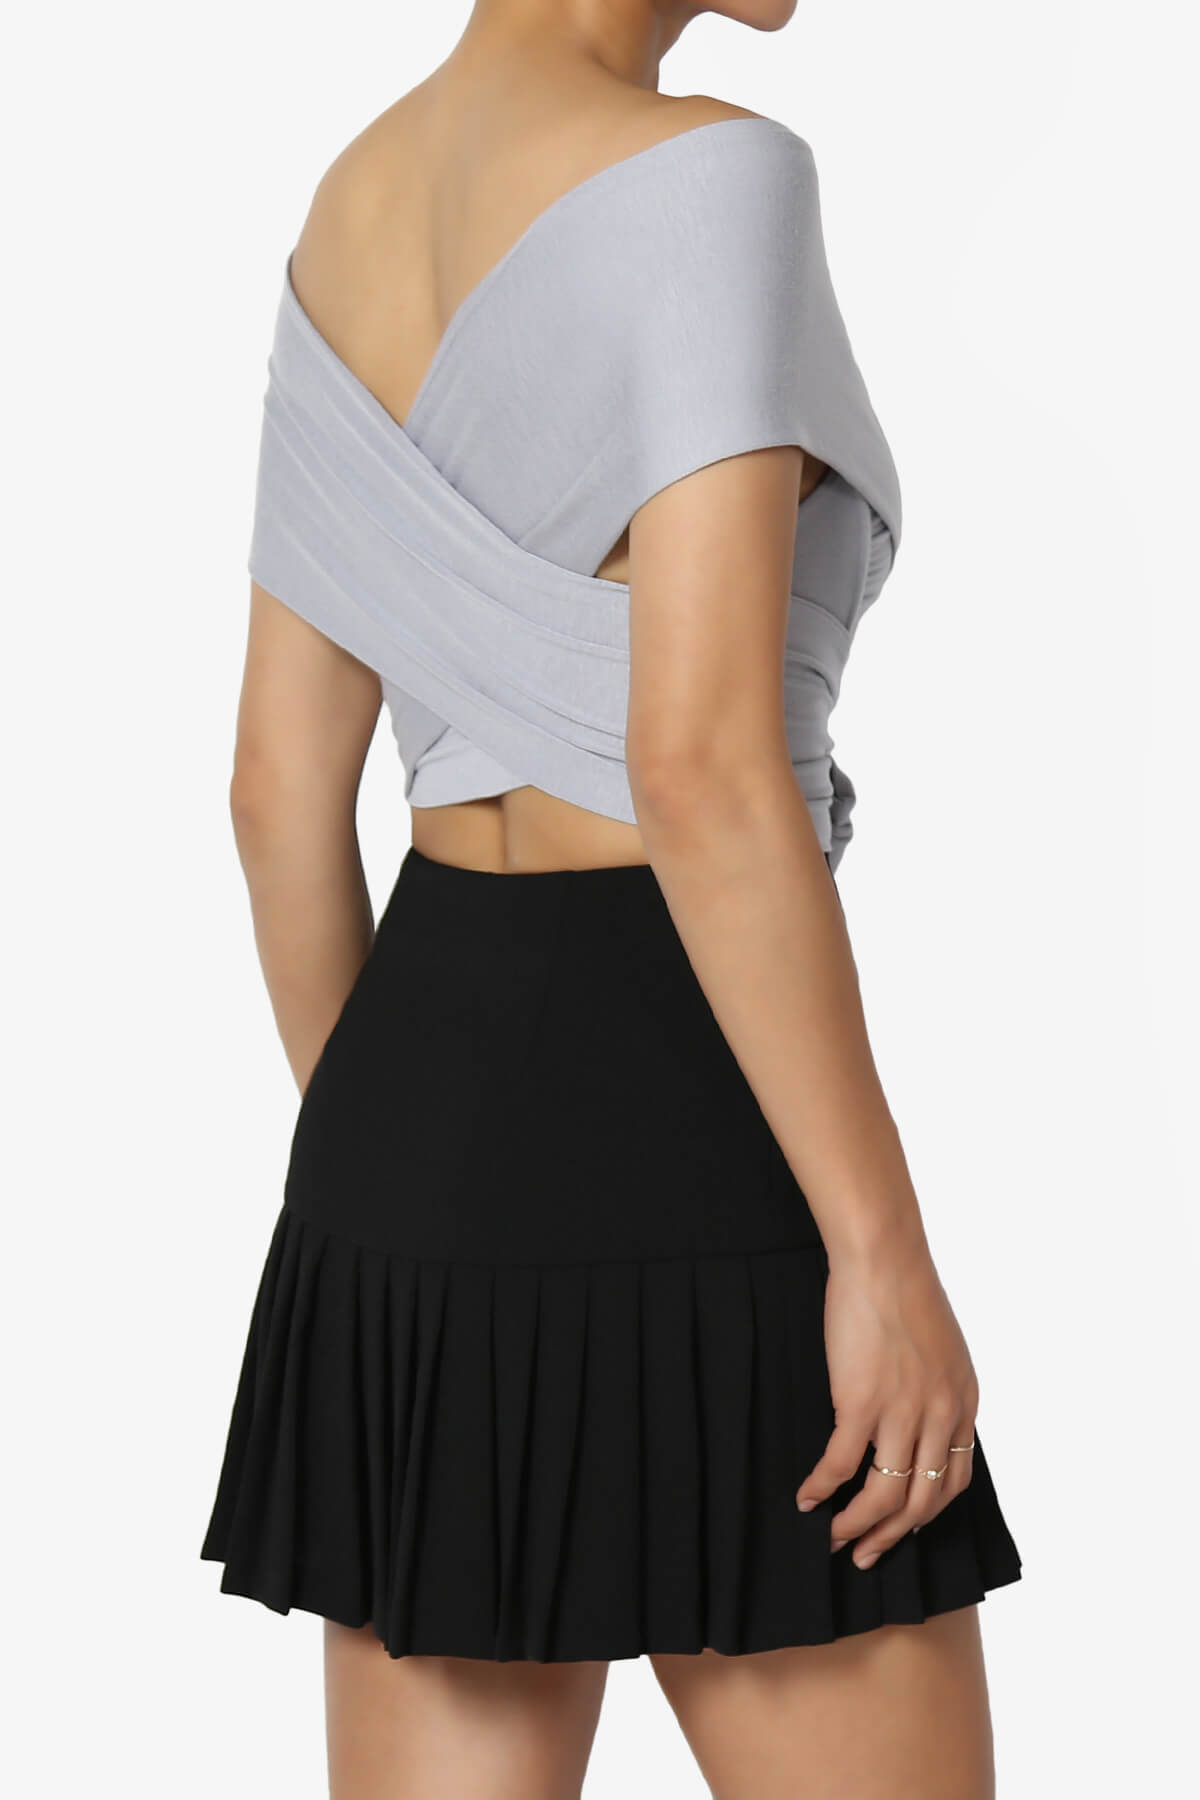 Clementine Multi Way Scarf Wrap Crop Top SILVER_4